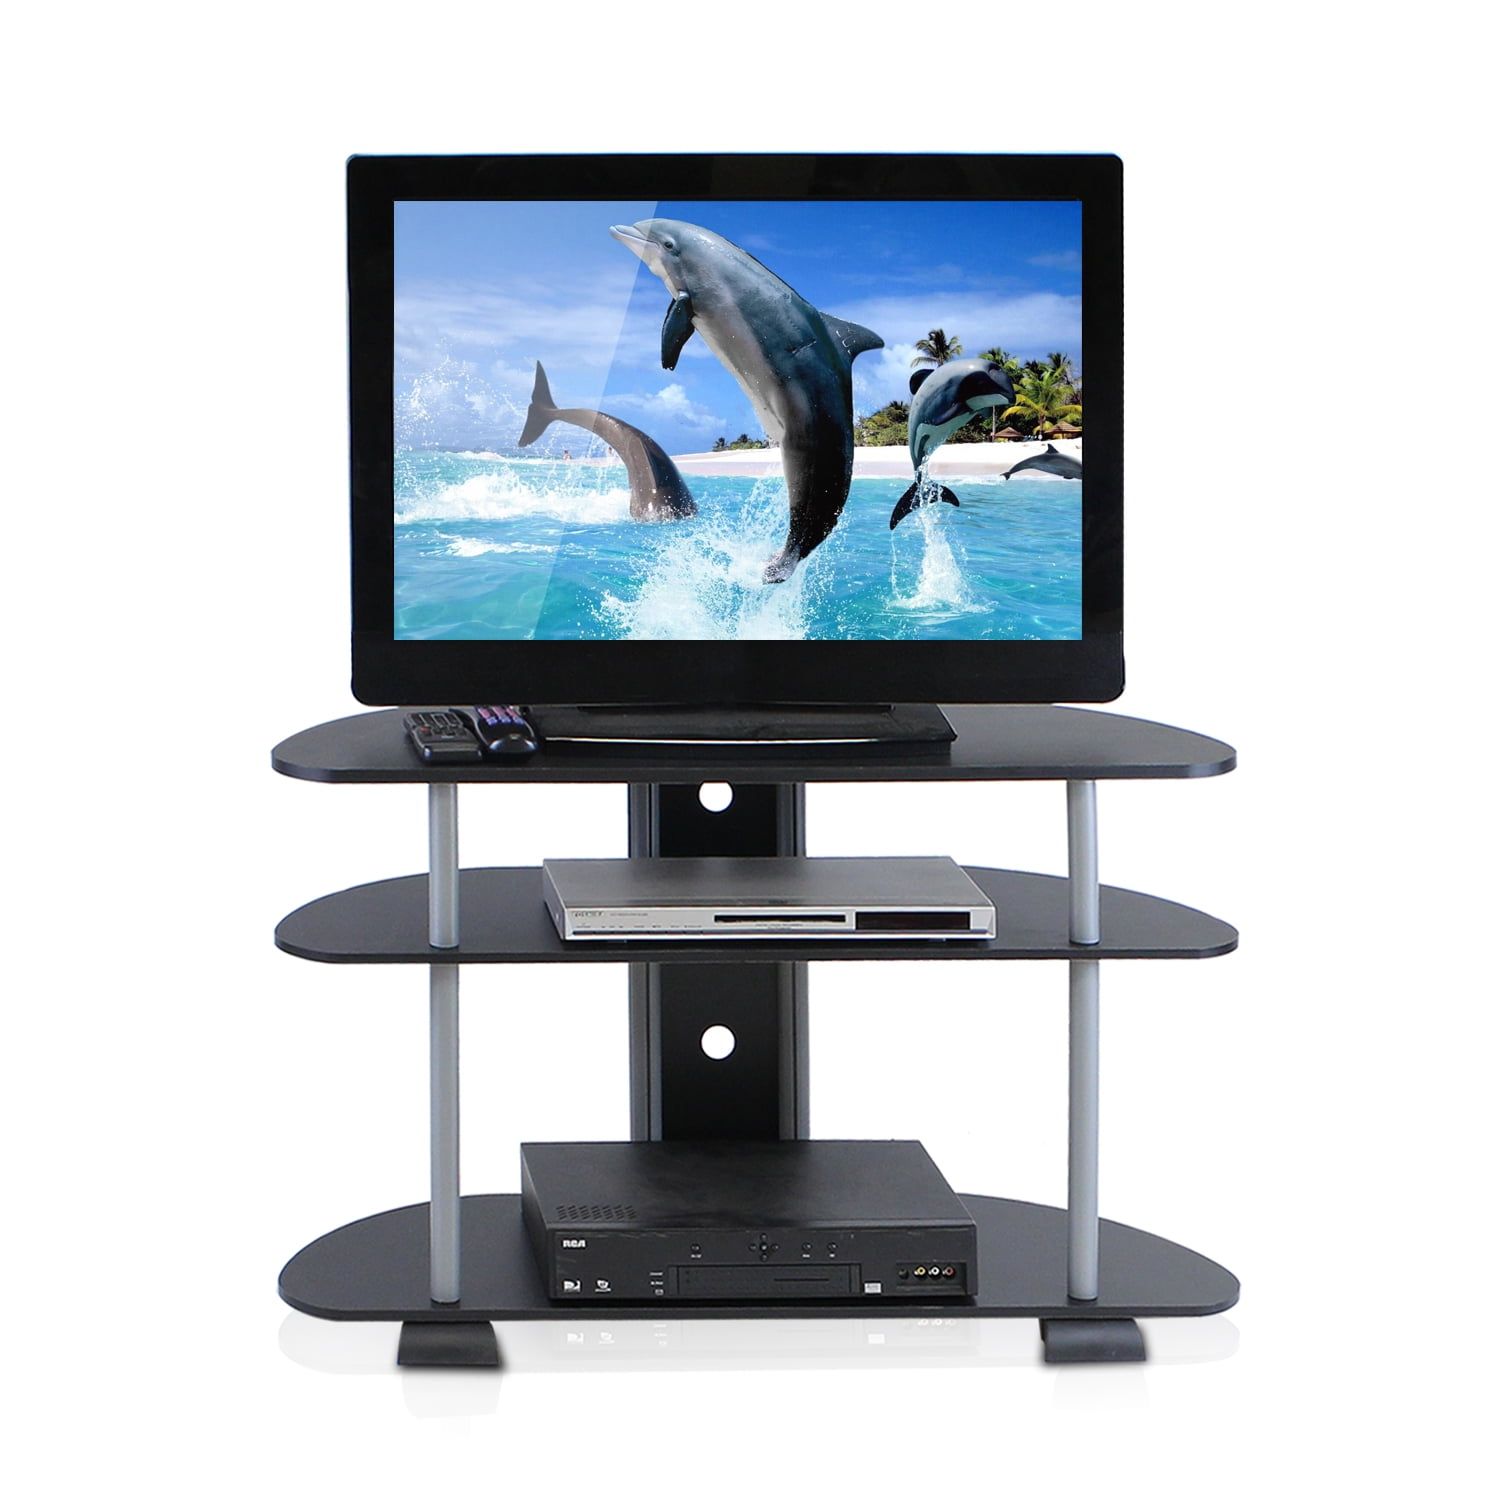 Turn N Tube 3 Tier Tv Stand For Tvs Up To 42", Multiple Colors Intended For Tier Stands For Tvs (Gallery 10 of 20)